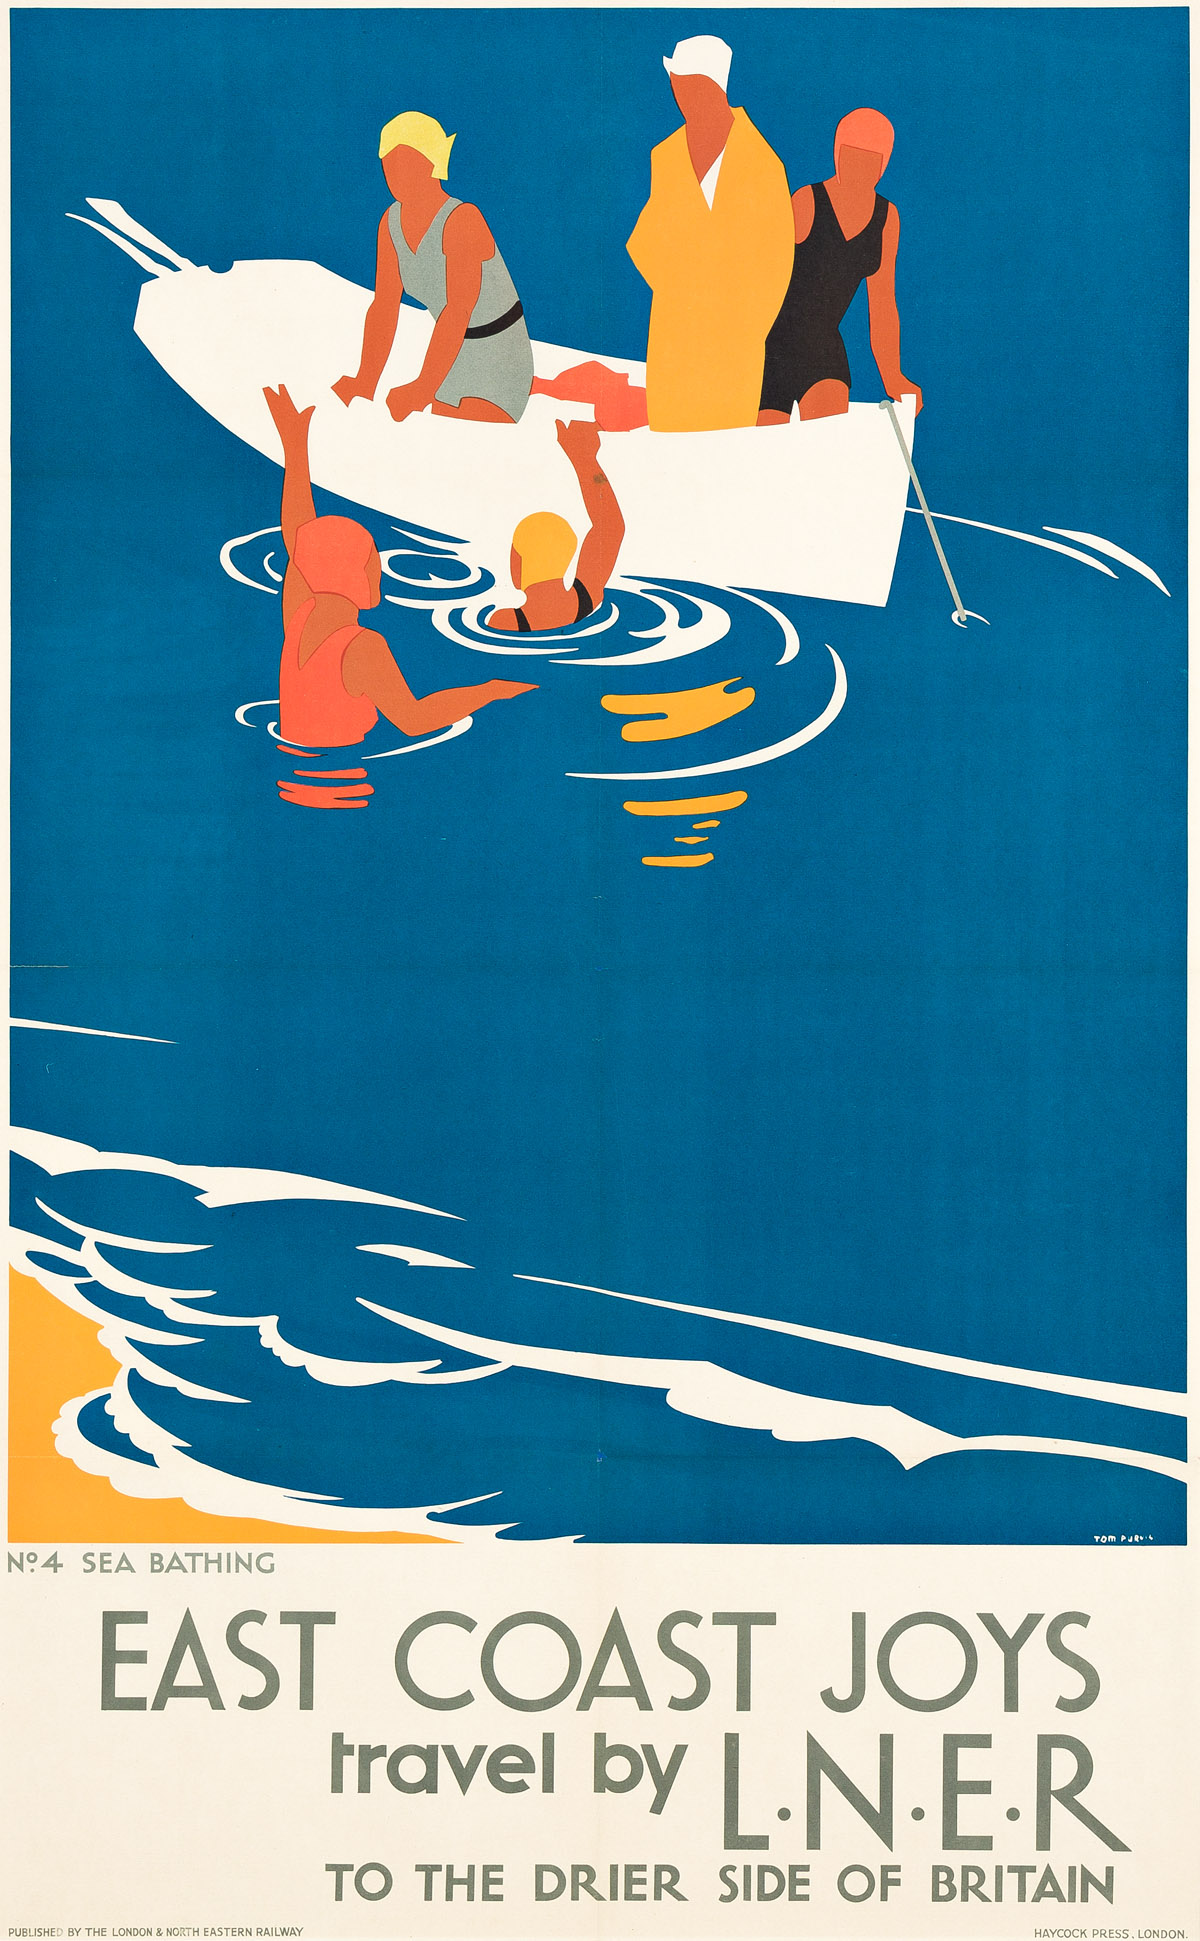 TOM PURVIS (1888-1959).  EAST COAST JOYS / TRAVEL BY L.N.E.R. Set of 6 posters. 1931. Each approximately 40x25 inches, 101½x63½ cm. Hay